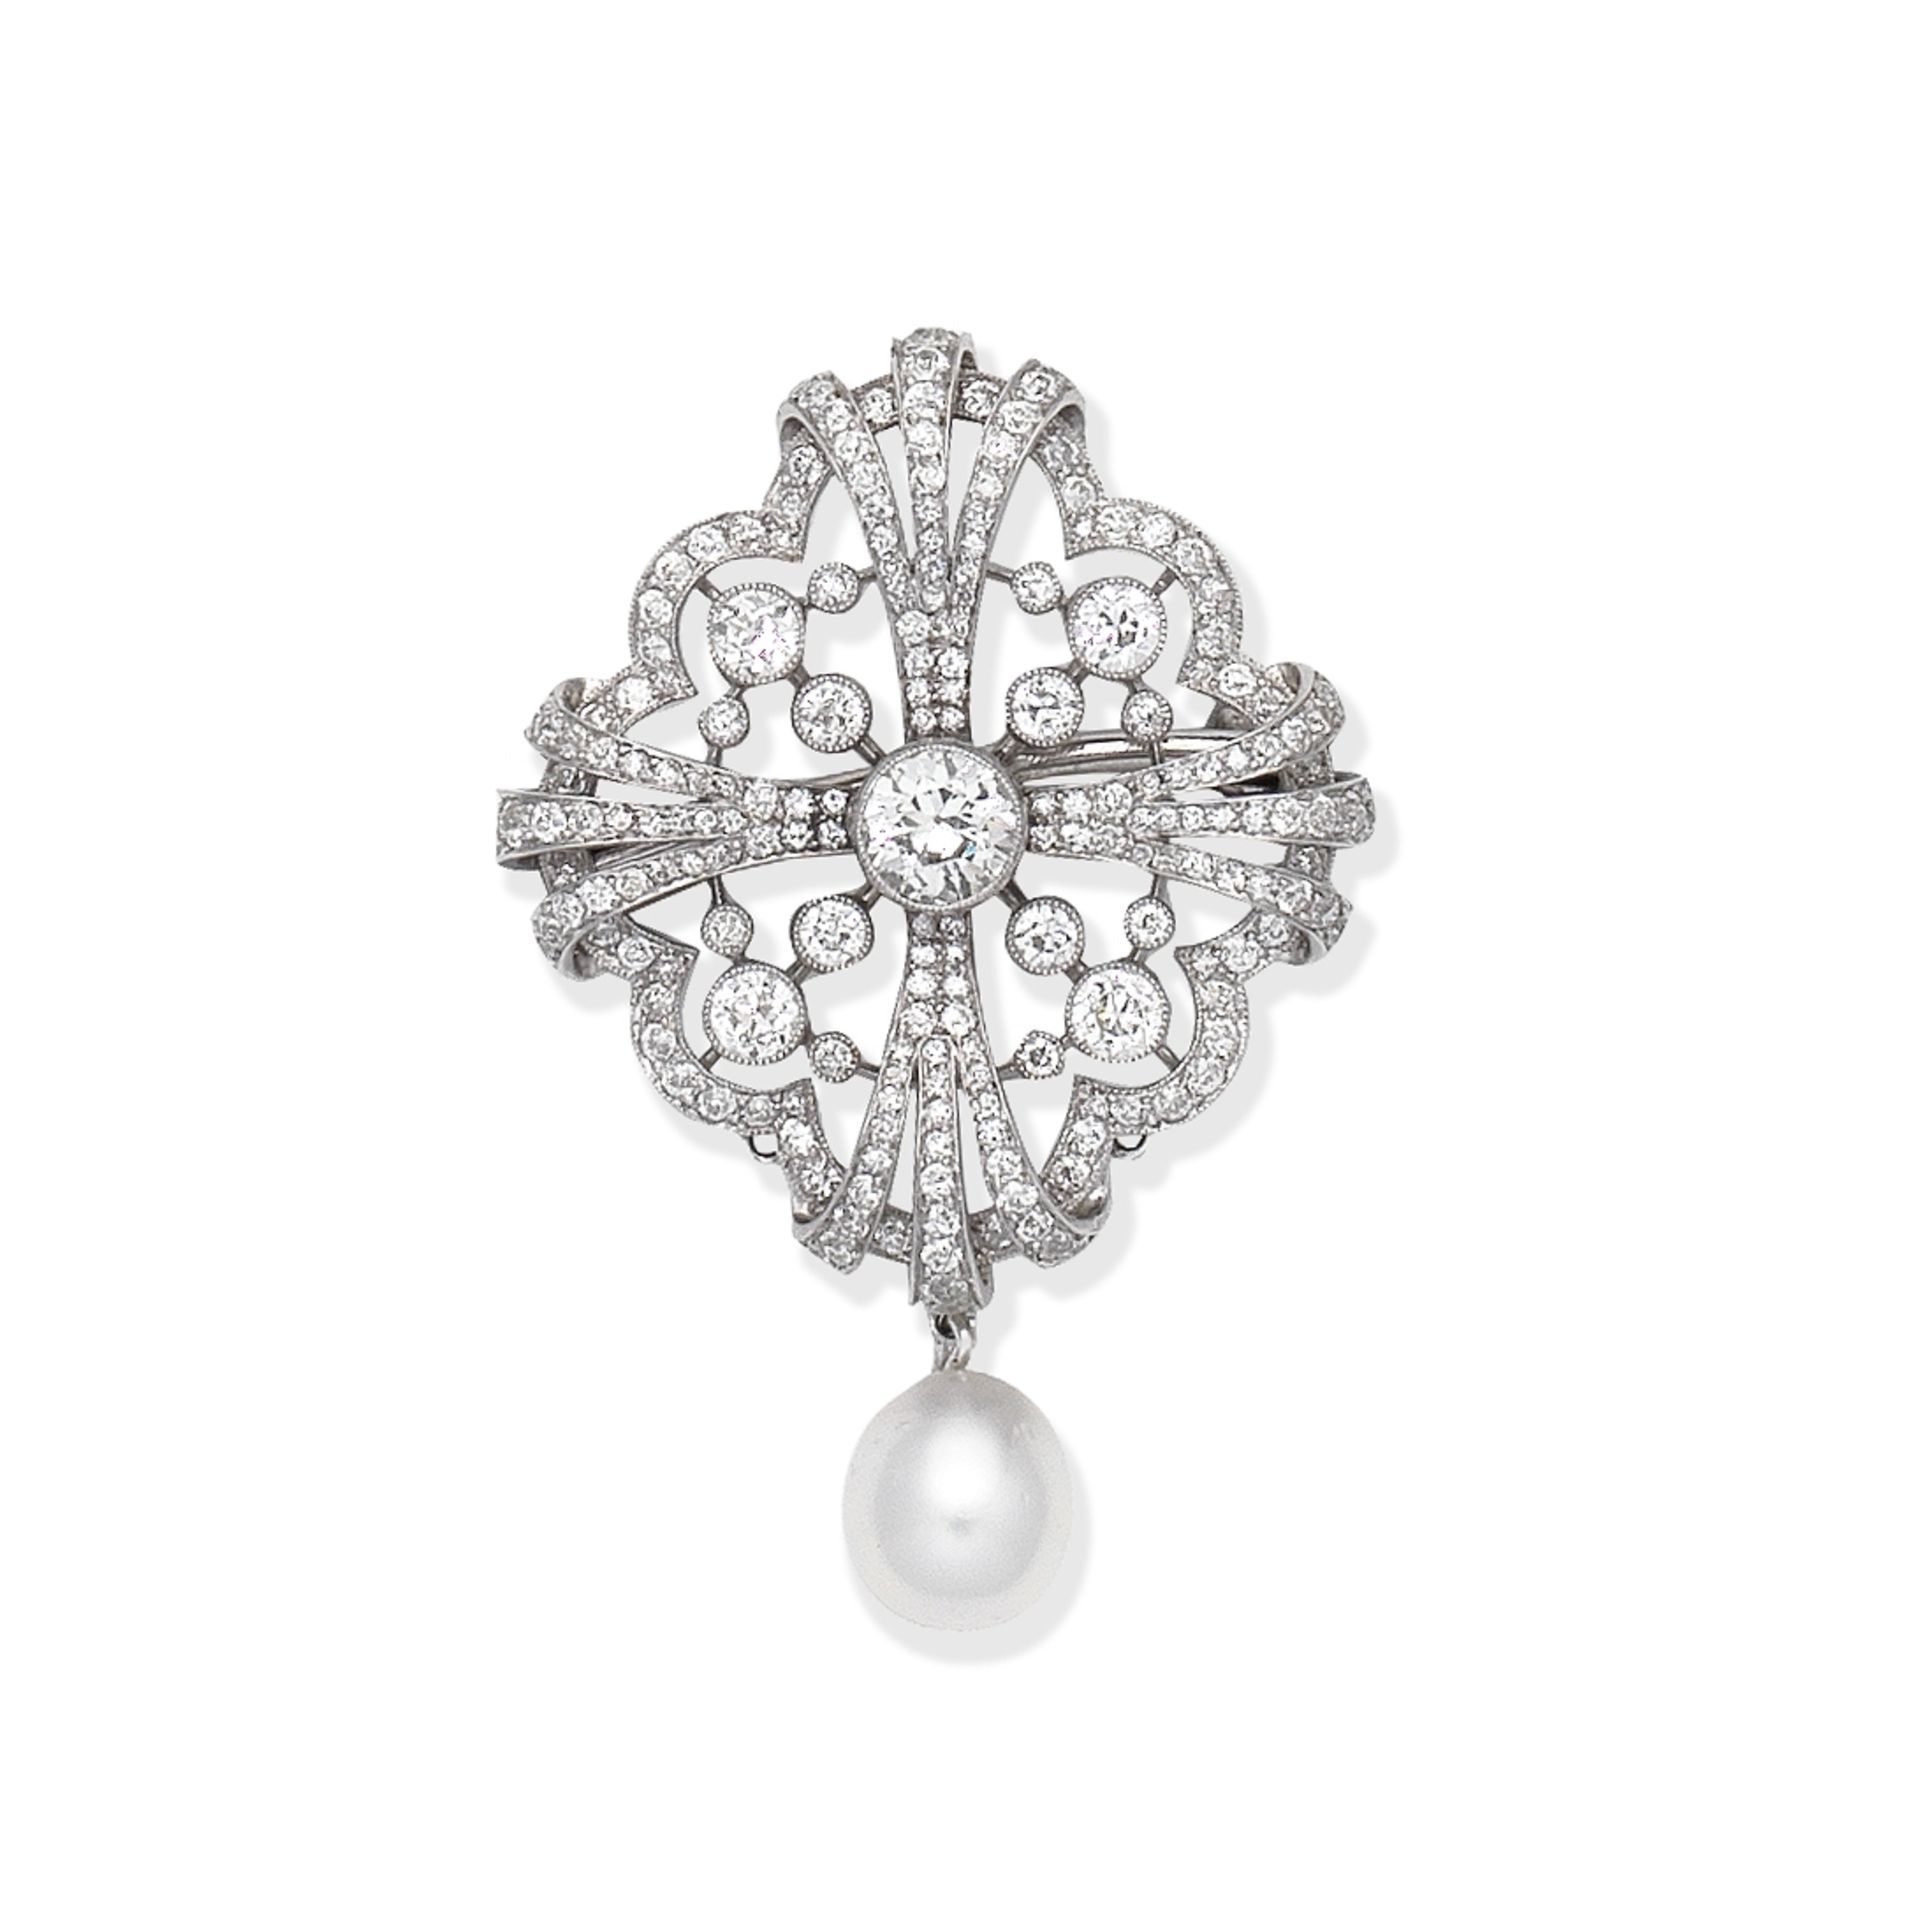 DIAMOND AND CULTURED PEARL BROOCH